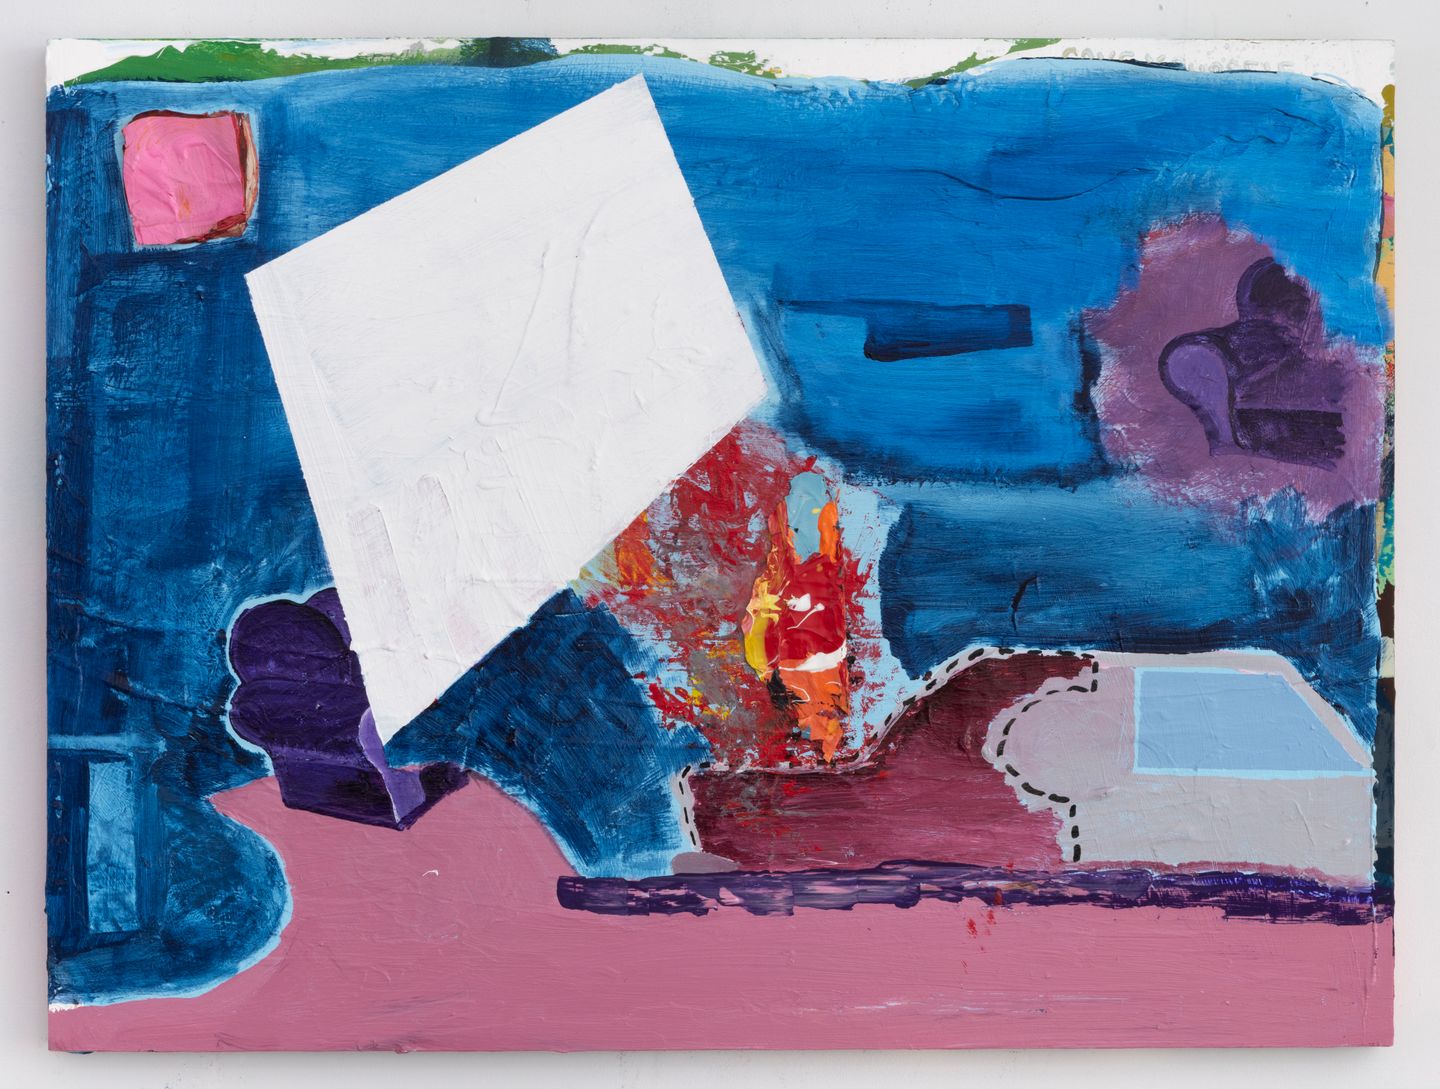 Walter Price, To accelerate the mayhem (2020). Acrylic and gesso on wood. 45.7 x 61 x 3 cm. Courtesy the artist, The Modern Institute/Toby Webster Ltd., Glasgow and Greene Naftali, New York.